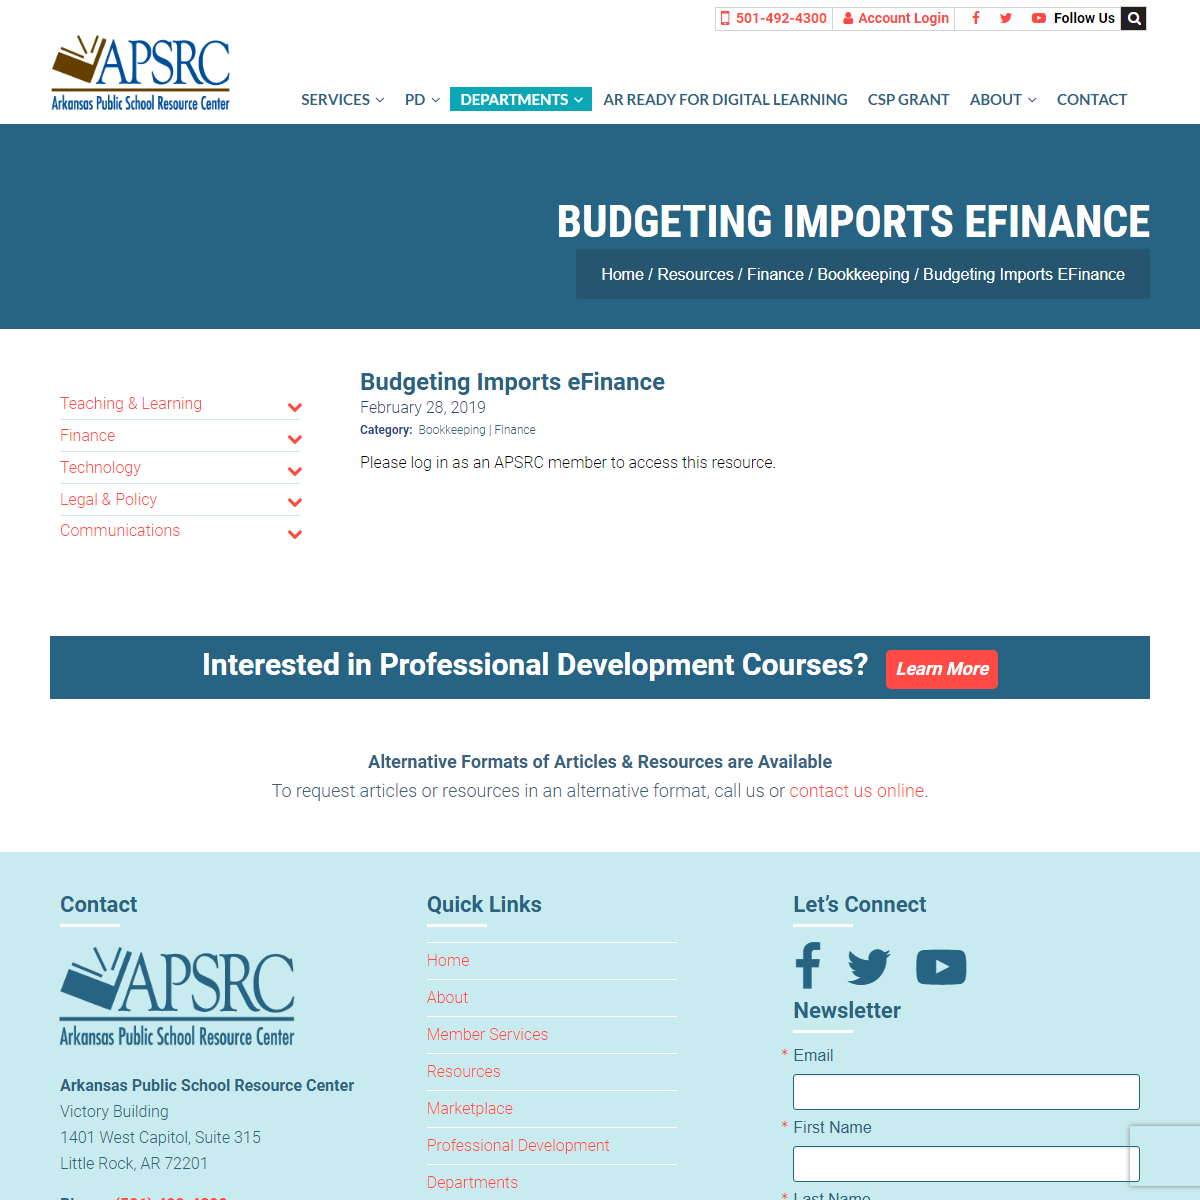 A complete backup of https://www.apsrc.net/resources/budget-imports-efinance/